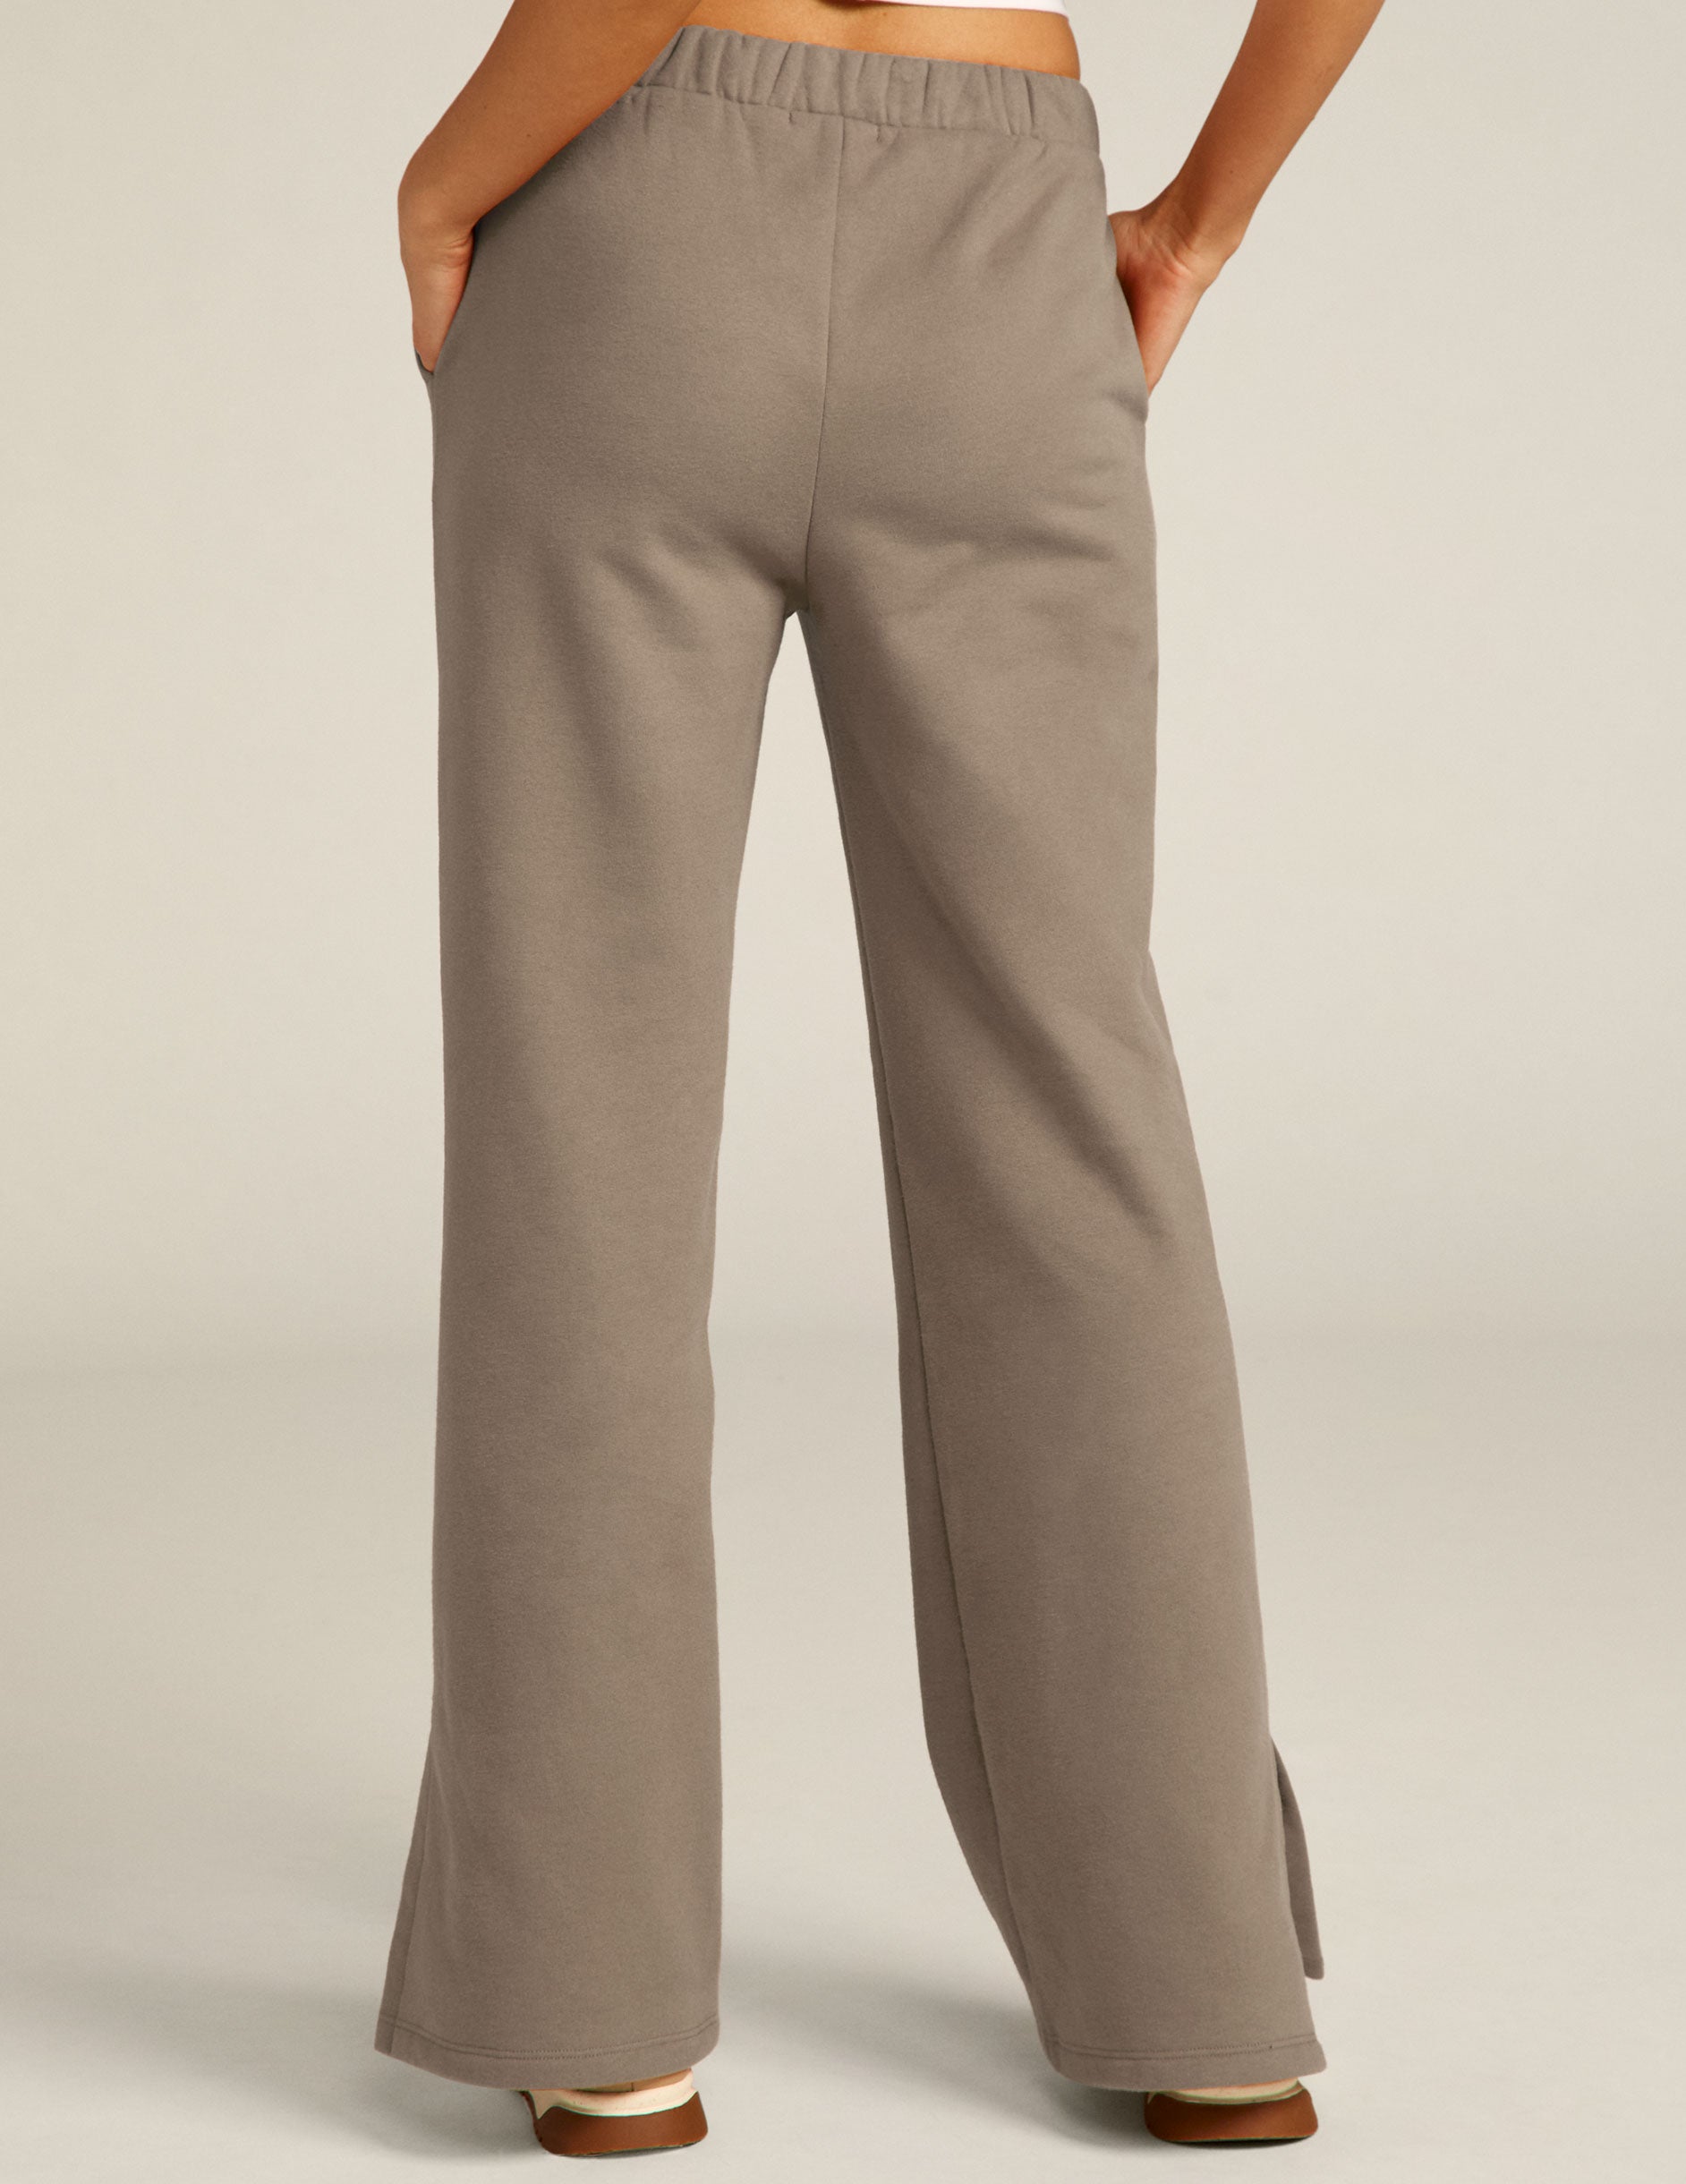 brown high rise pants with pockets and slit hem. 